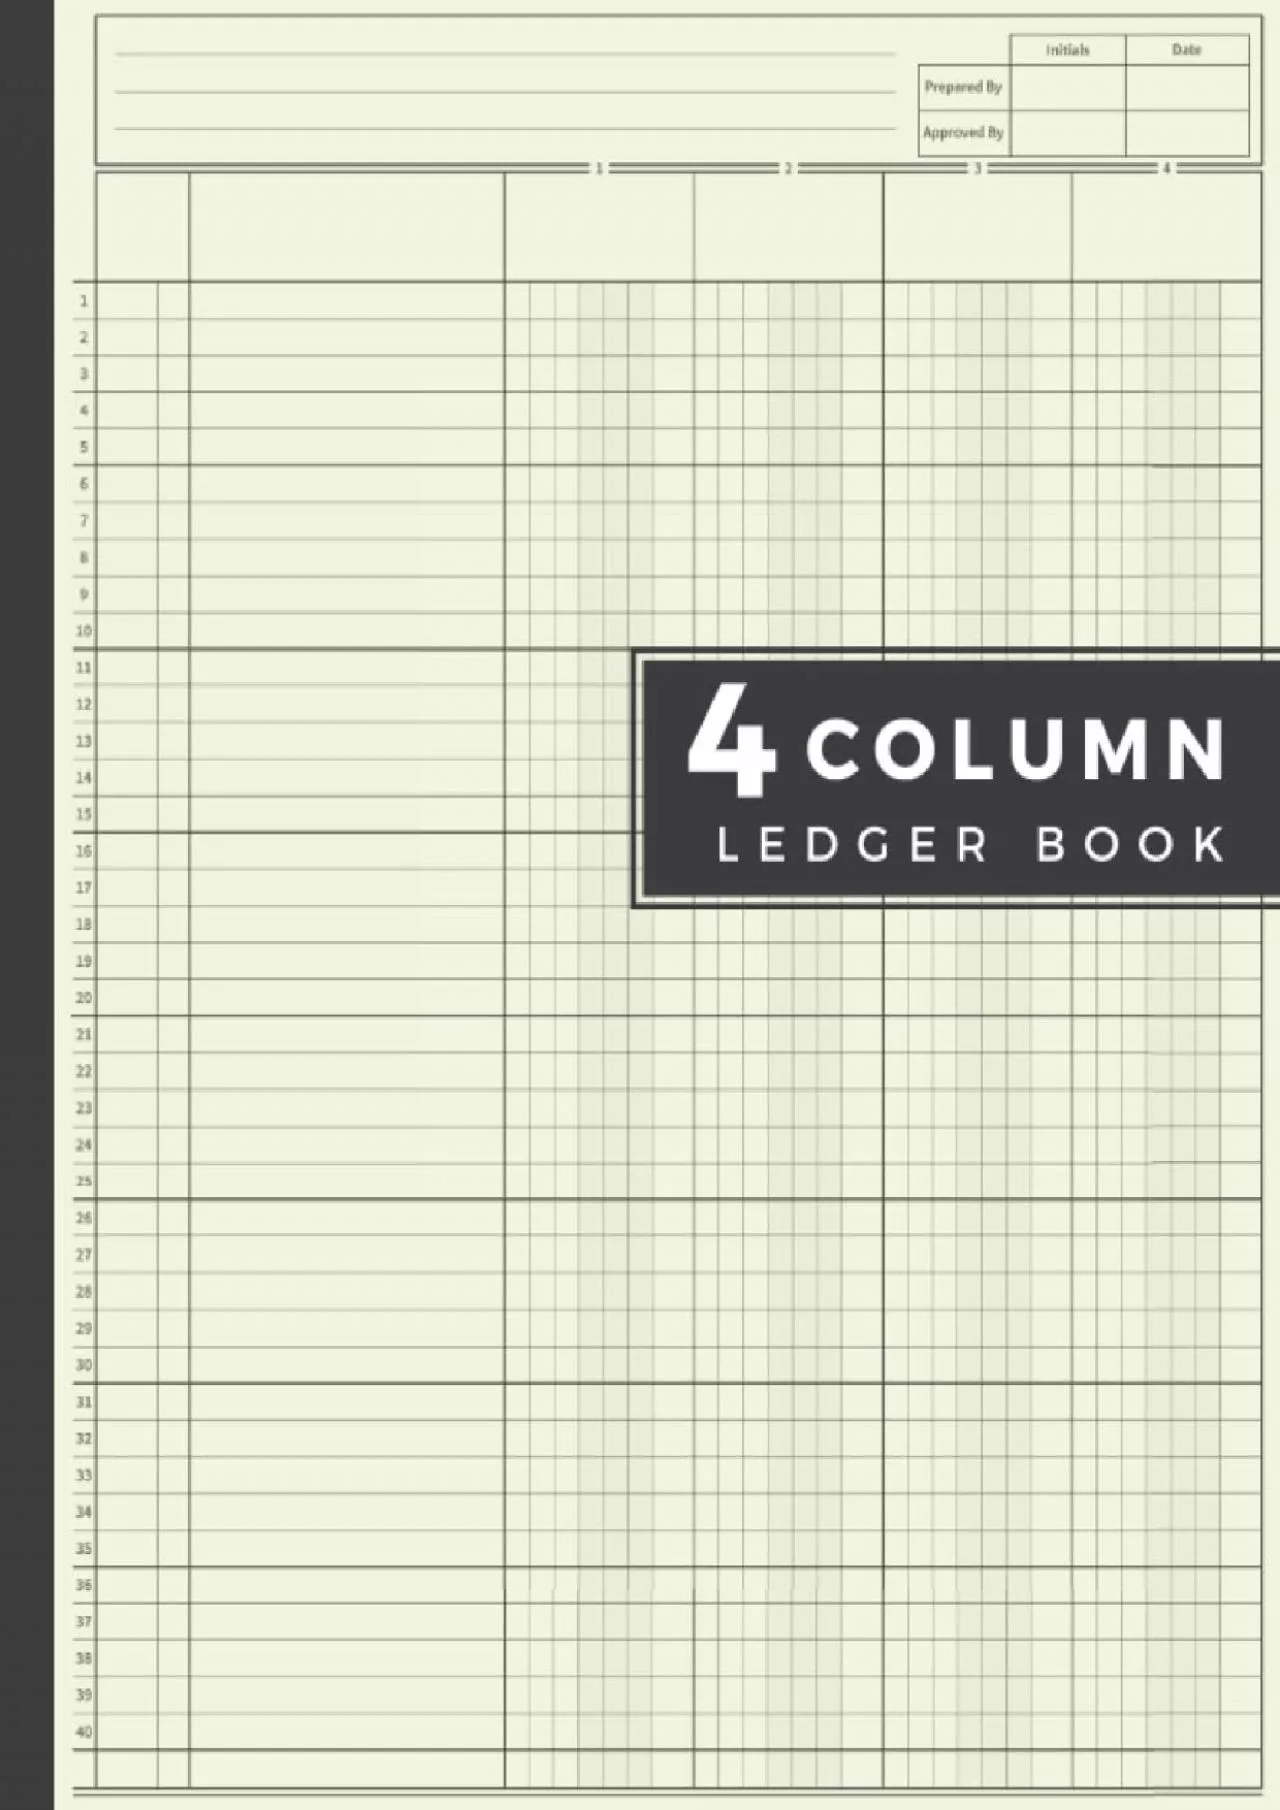 4 Column Ledger Book: Accounting Ledger Book for Bookkeeping | Account Journal 110 Pages